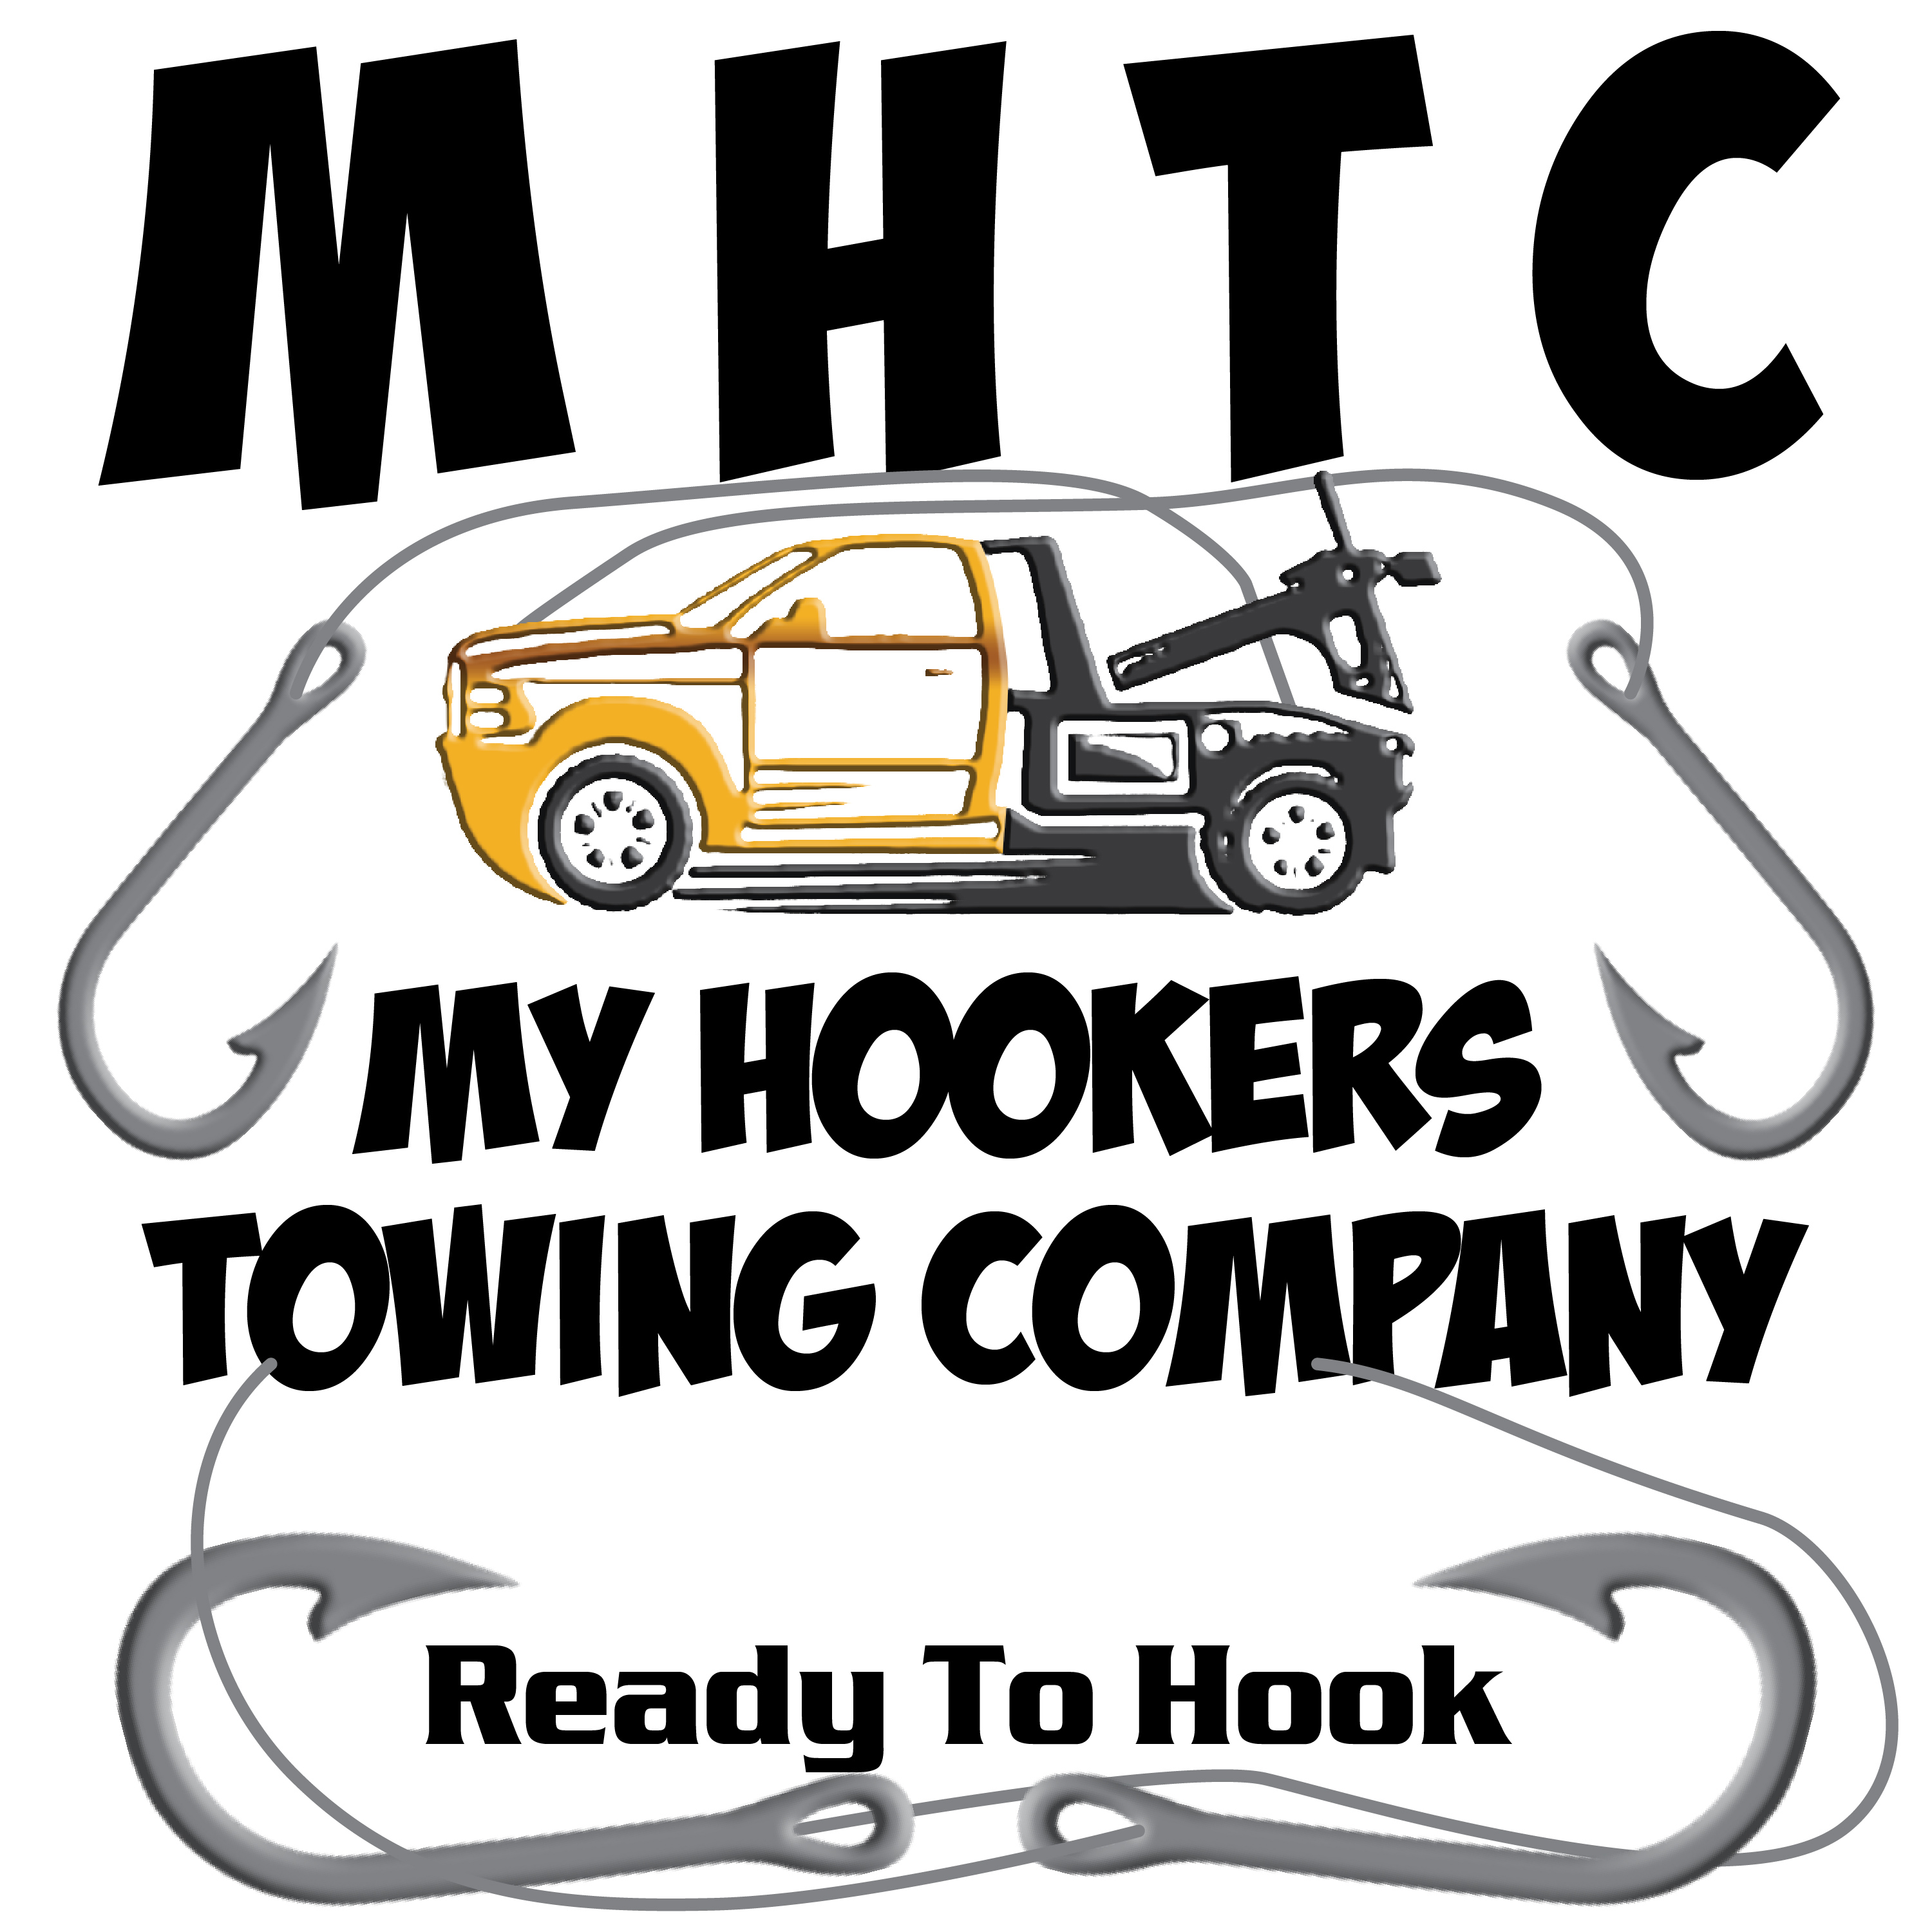 My Hookers Towing Company logo